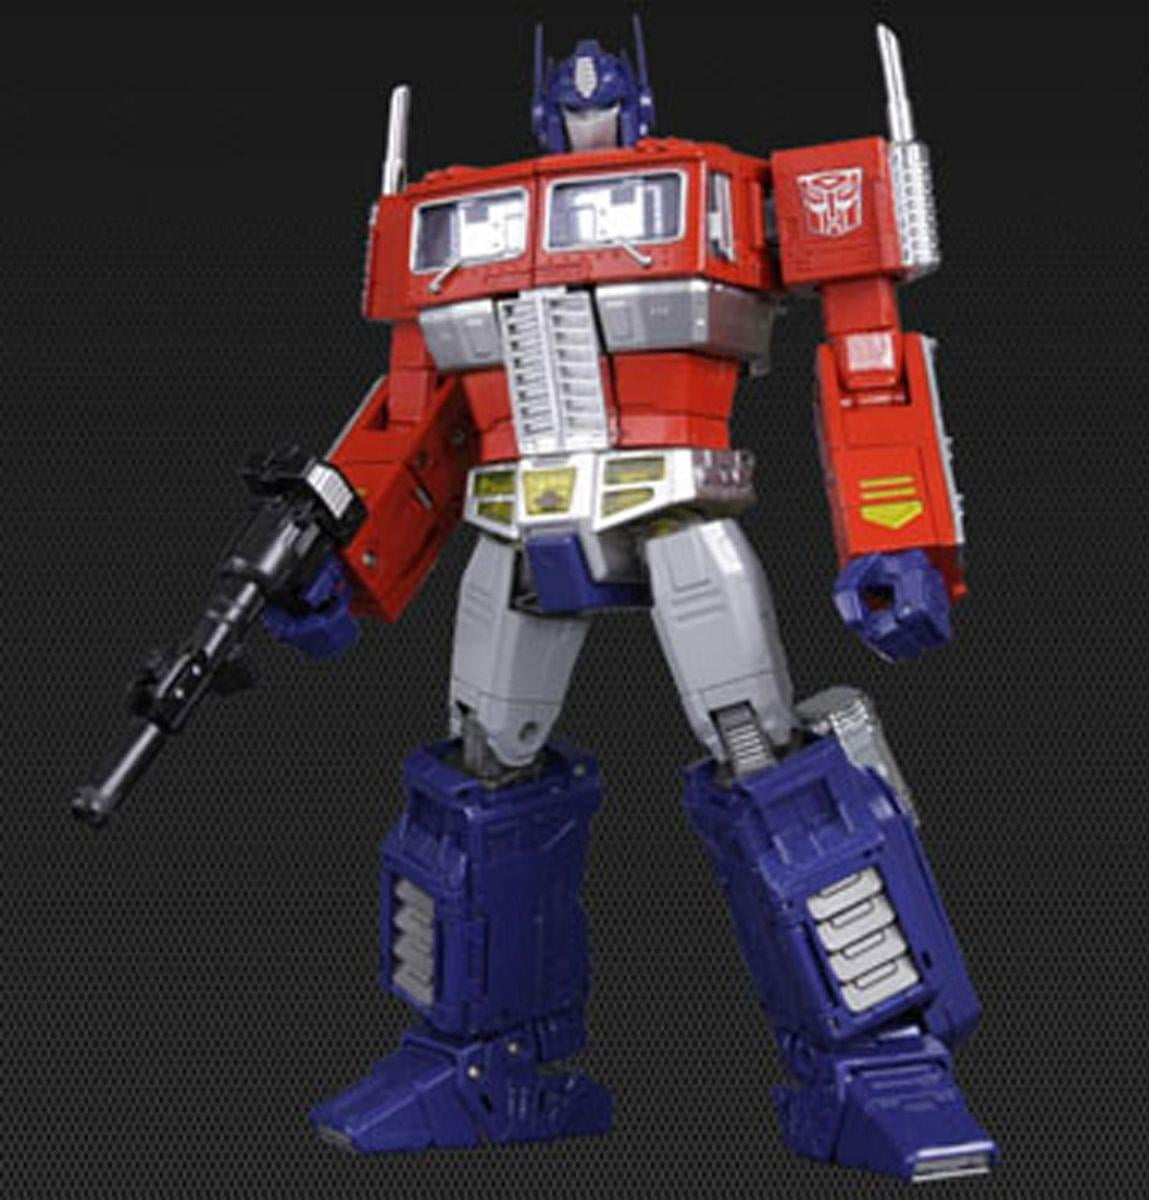 Transformers G1 Action Figure Autobots Masterpiece MP-10 Optimus Prime gifts 